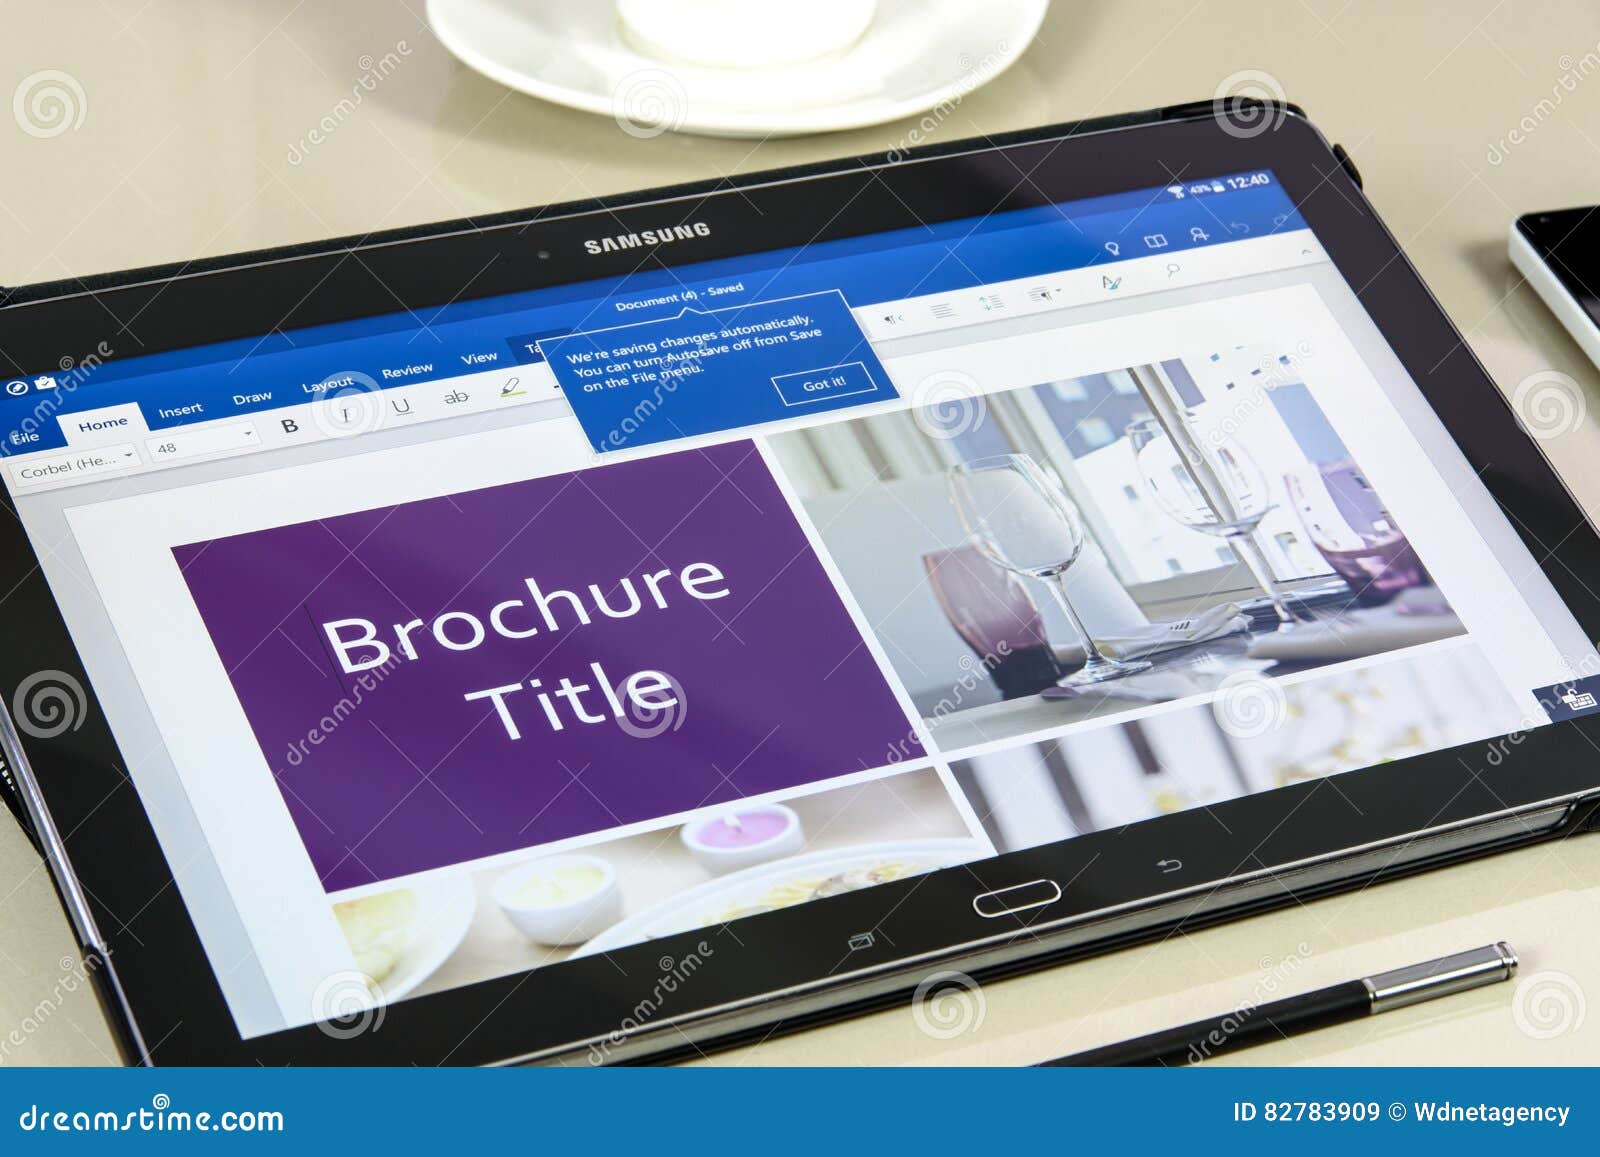 Microsoft Office Word App on Samsung Tablet Editorial Stock Image - Image  of business, concept: 82783909